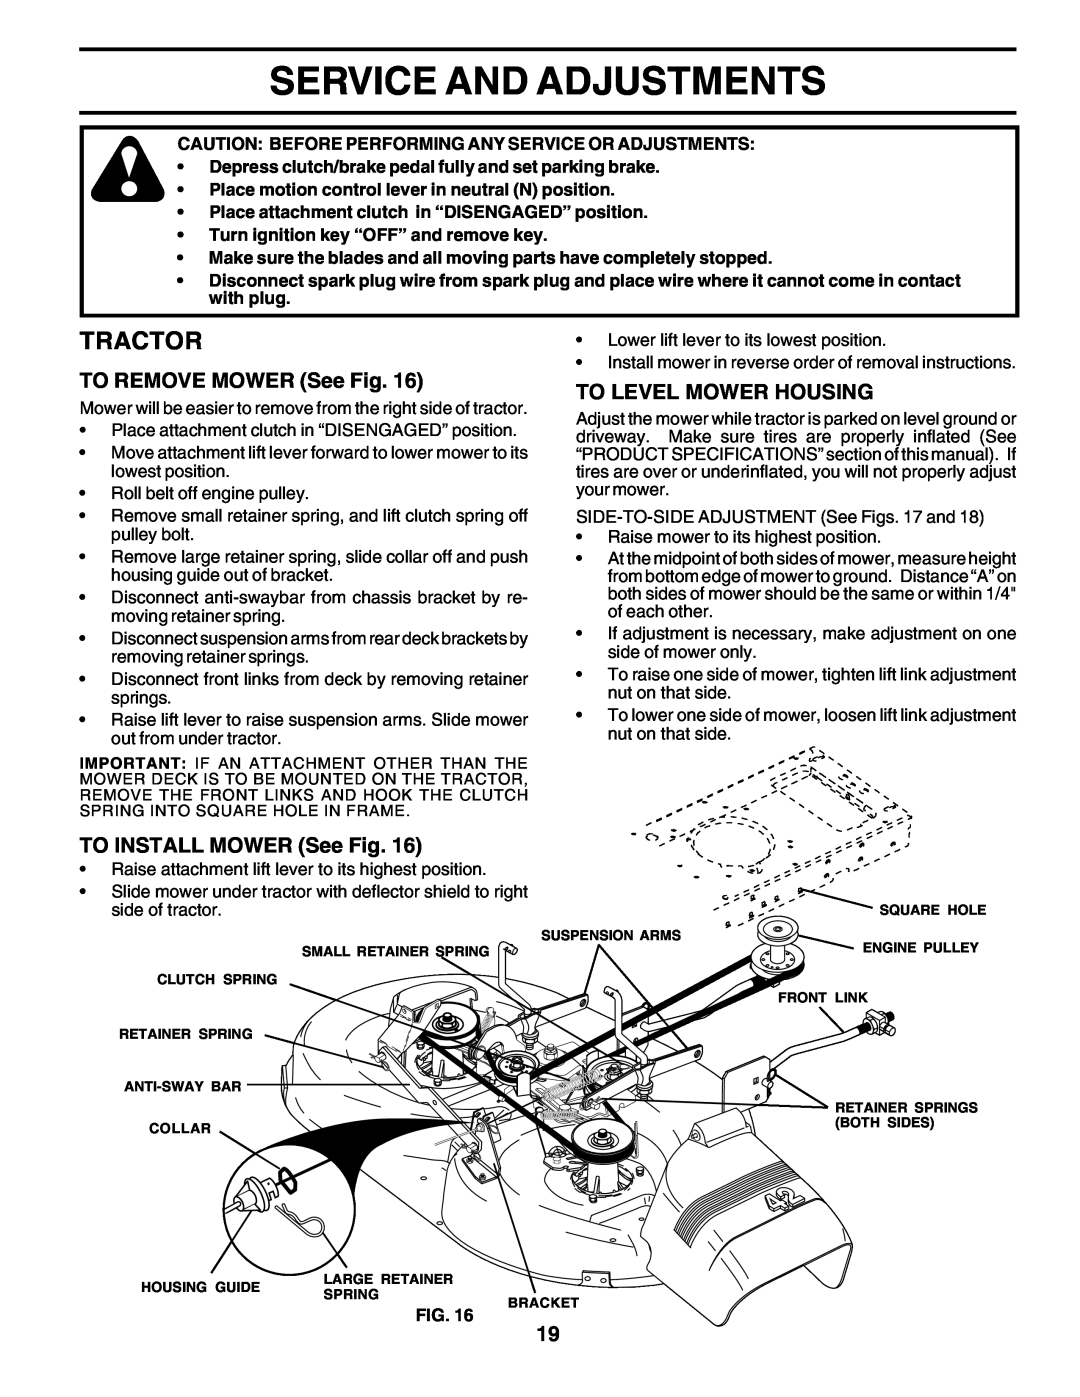 Weed Eater S165H42D owner manual Service And Adjustments, Tractor, TO REMOVE MOWER See Fig, TO INSTALL MOWER See Fig 